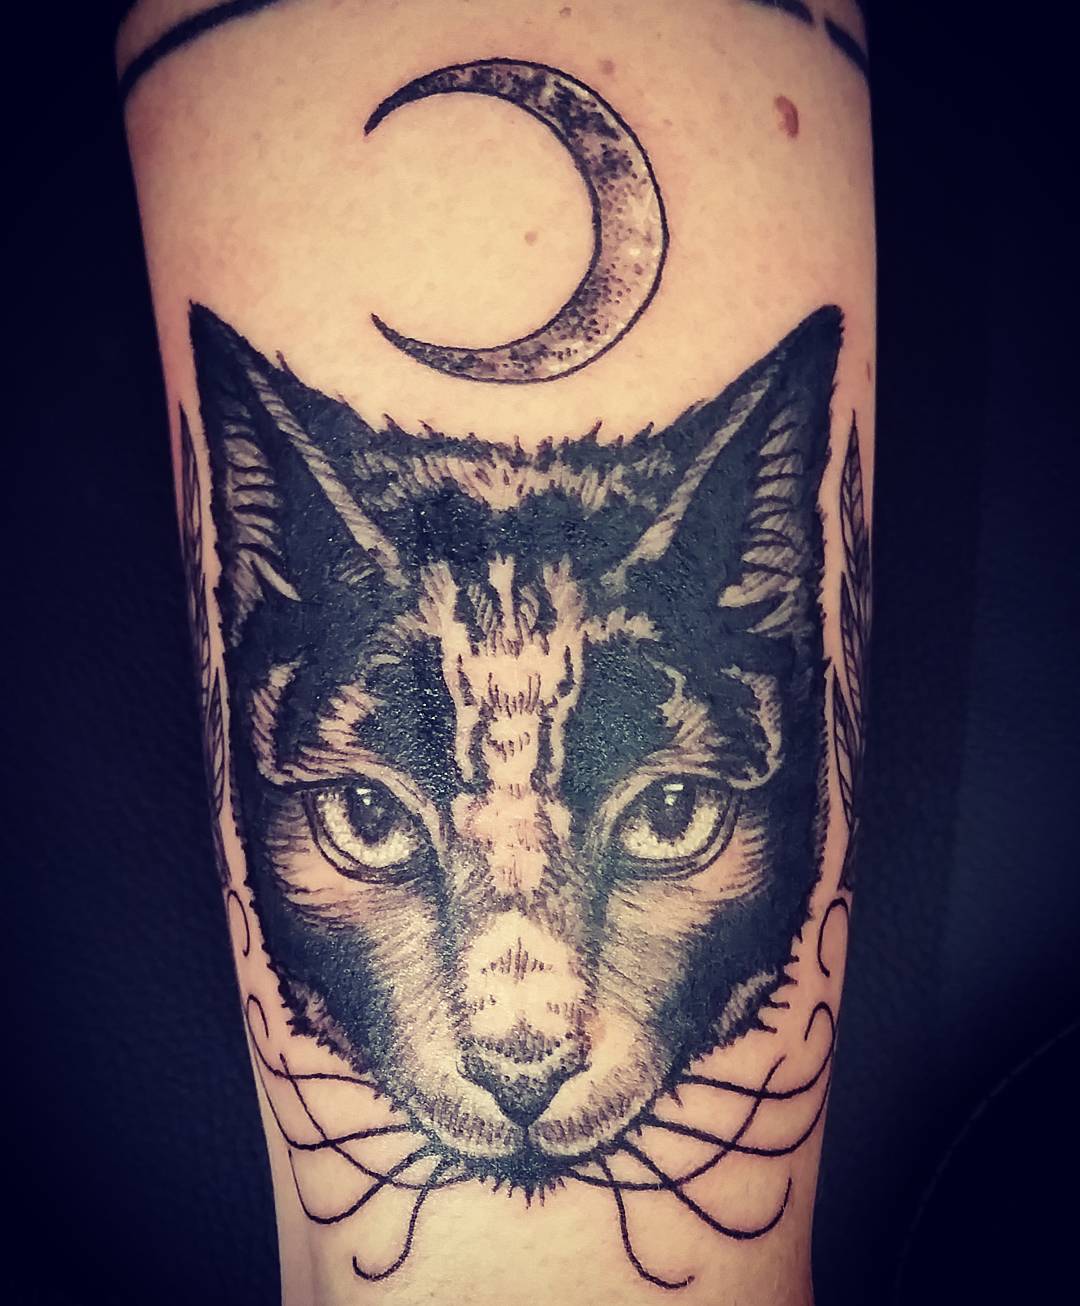 65+ Mysterious Black Cat Tattoo Ideas Are They Good Or Evil?